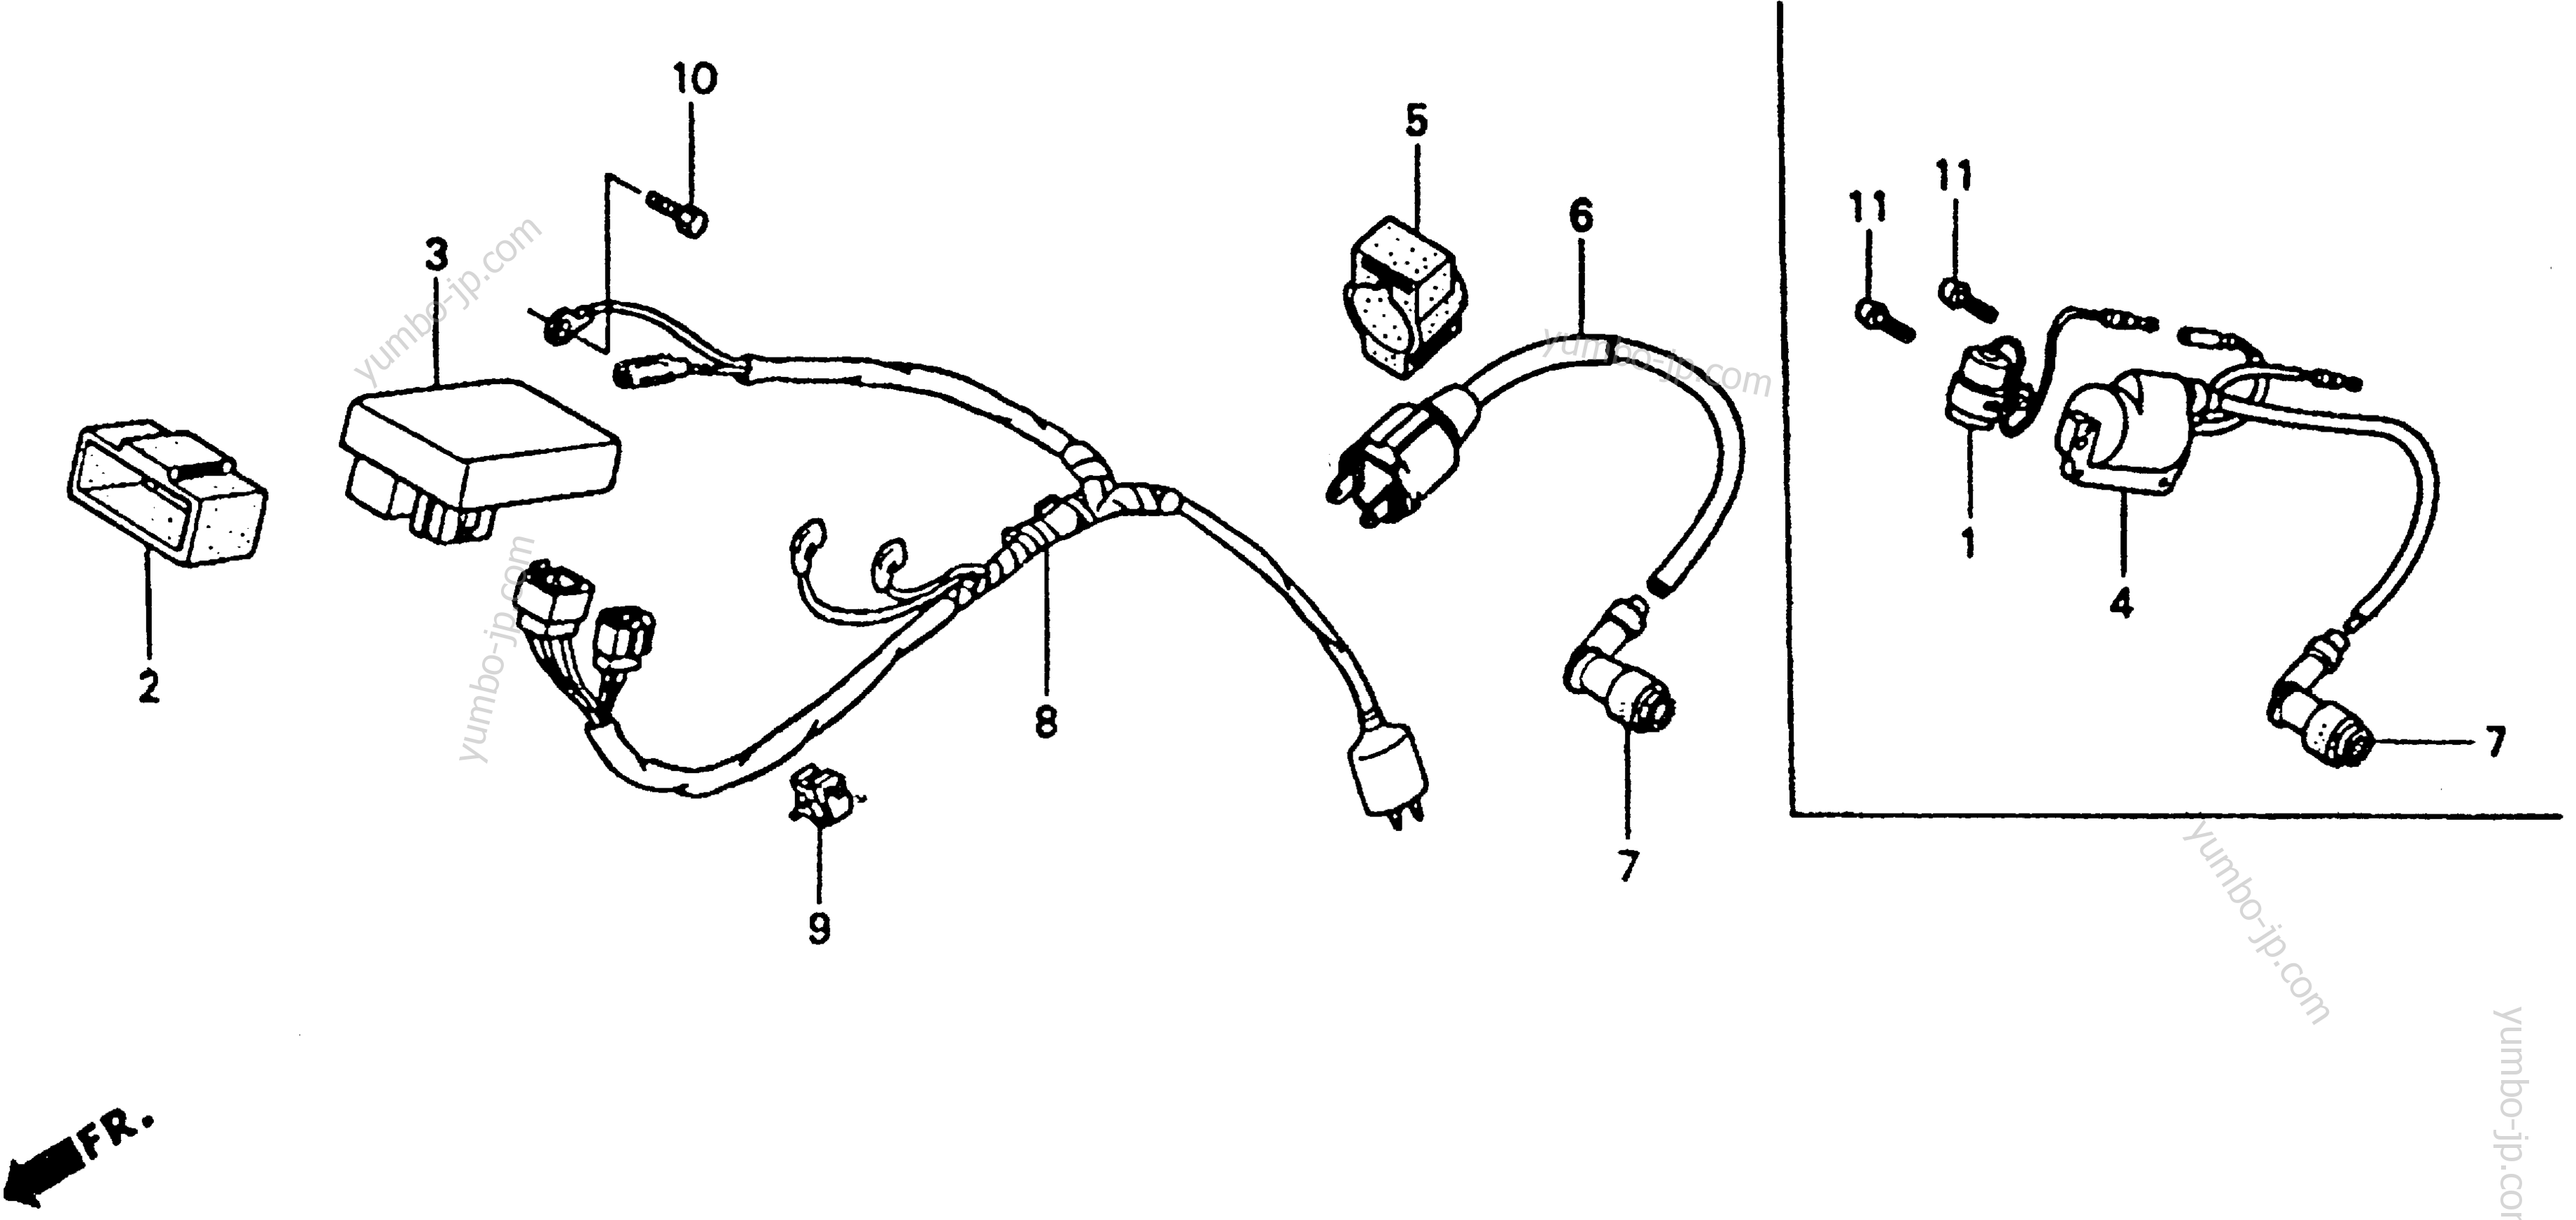 WIRE HARNESS for motorcycles HONDA XR80R A 1985 year